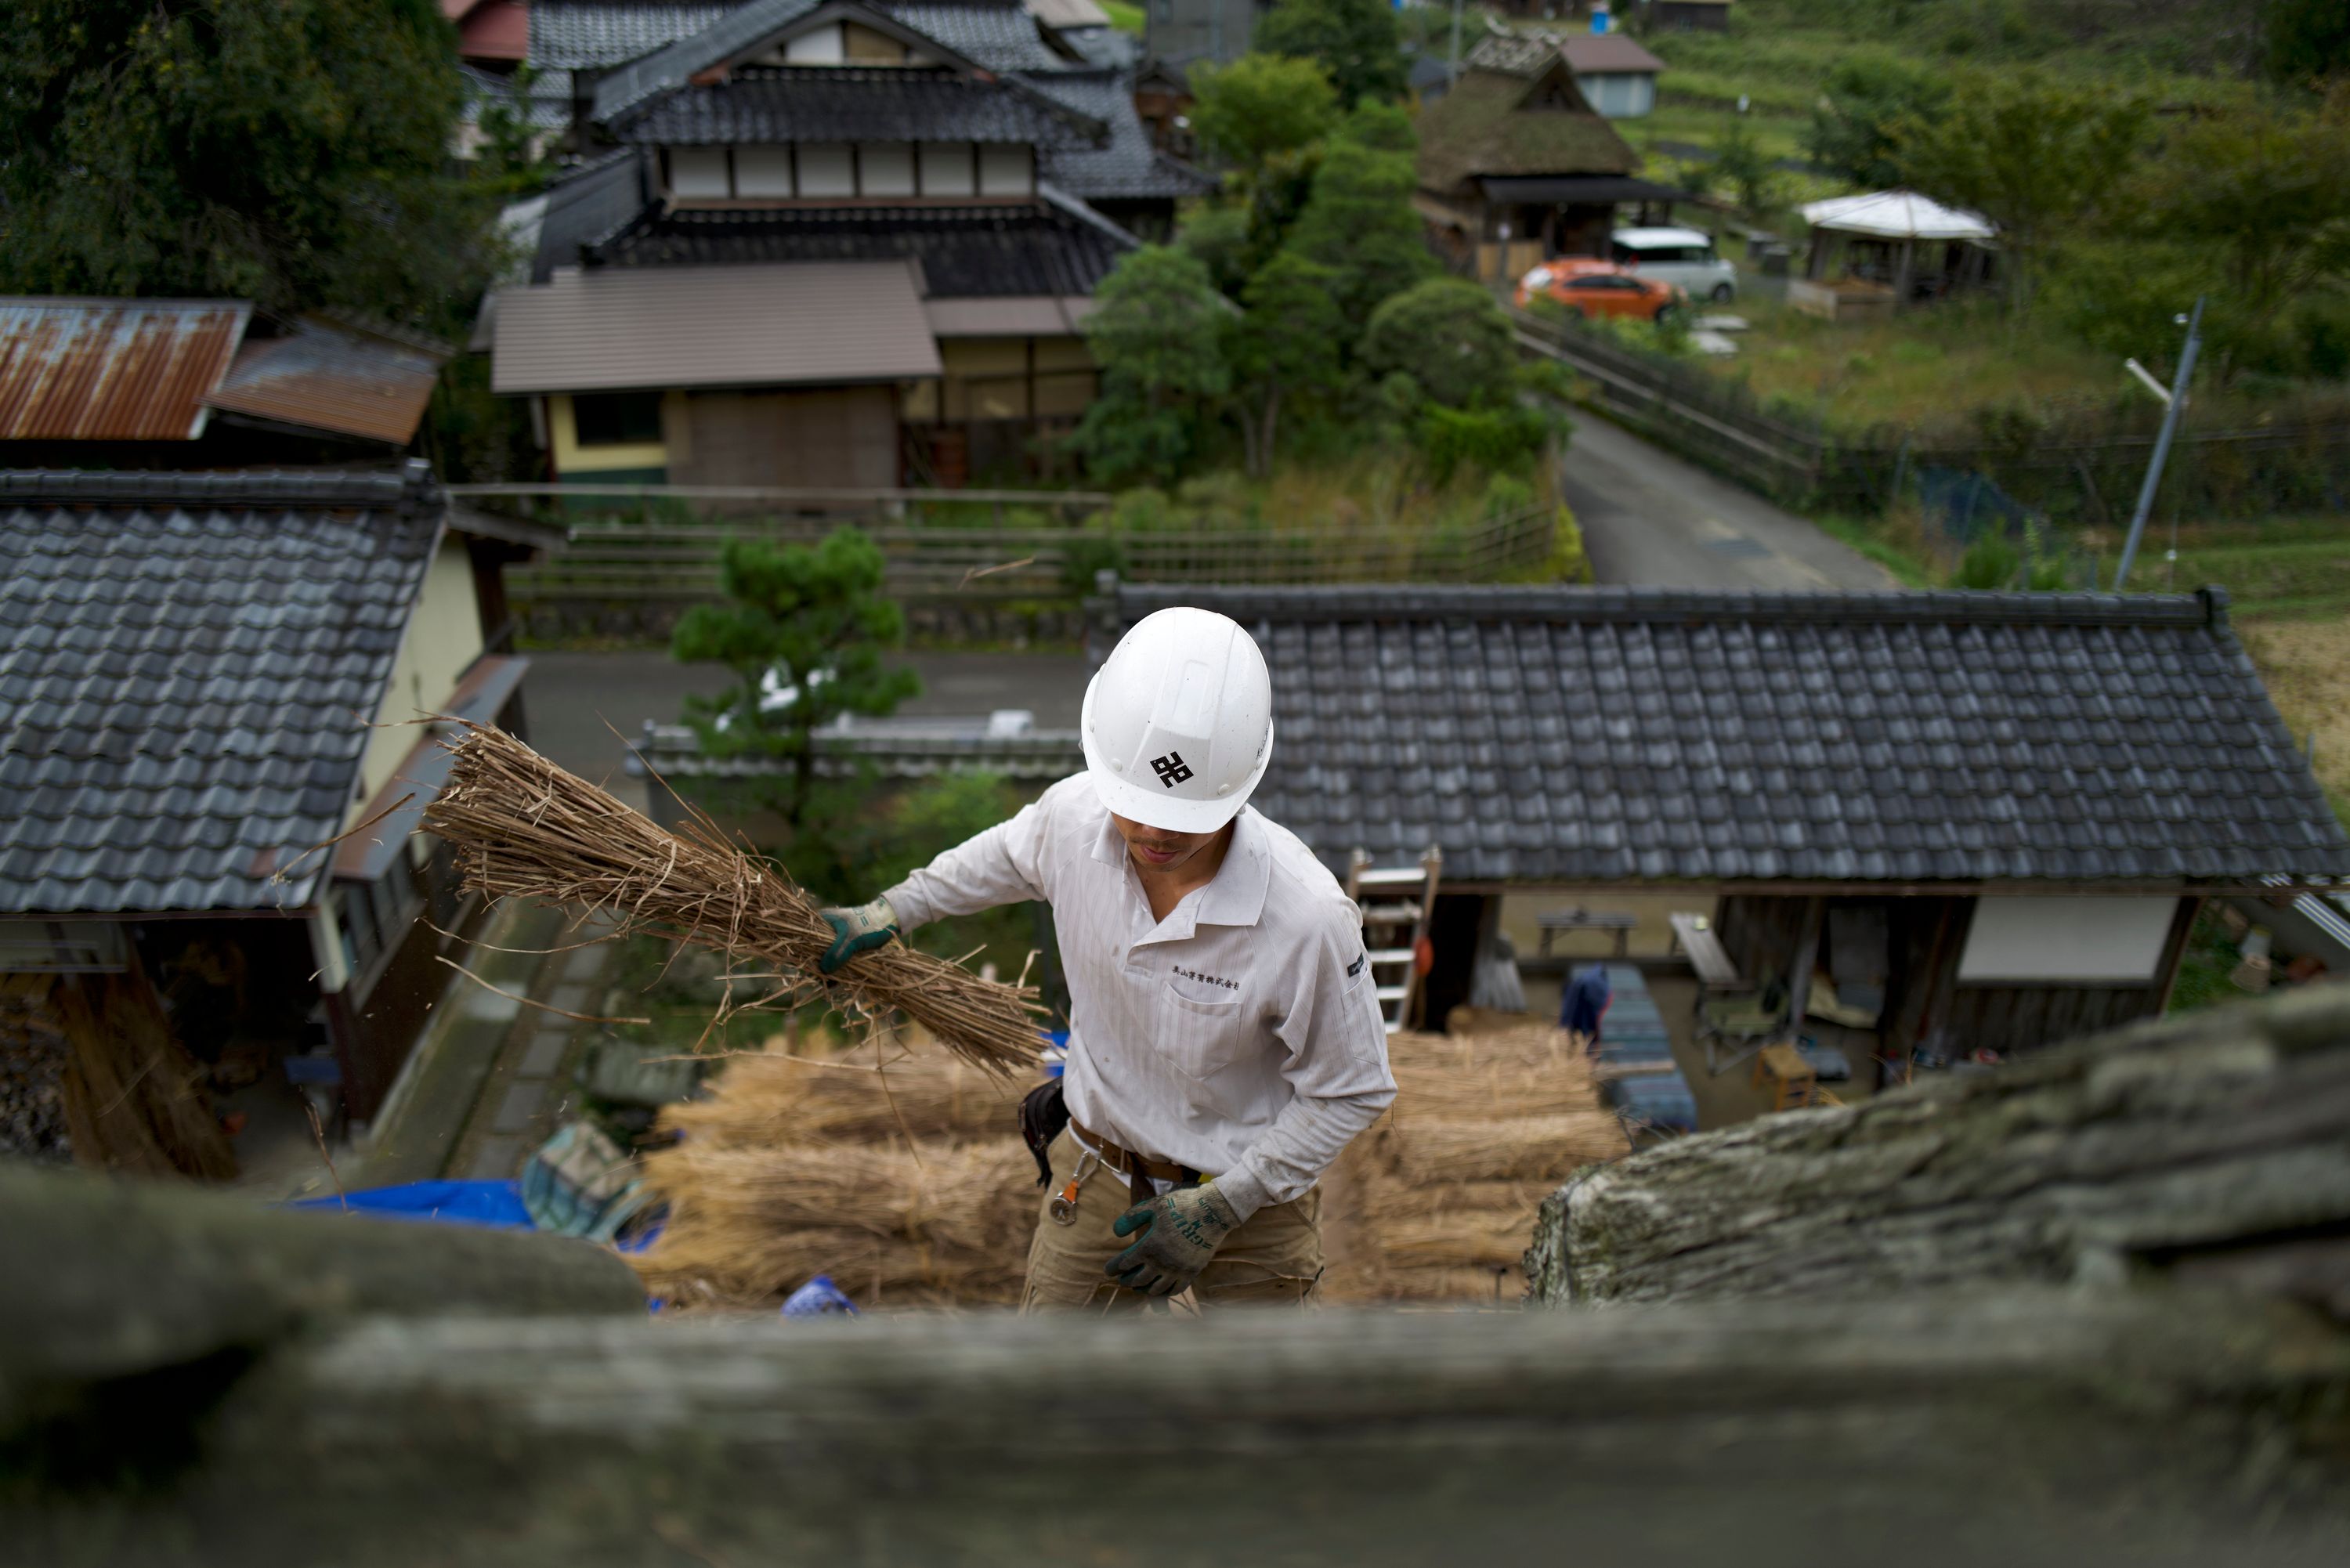 A thatcher works on the roof of a traditional Japanese house.